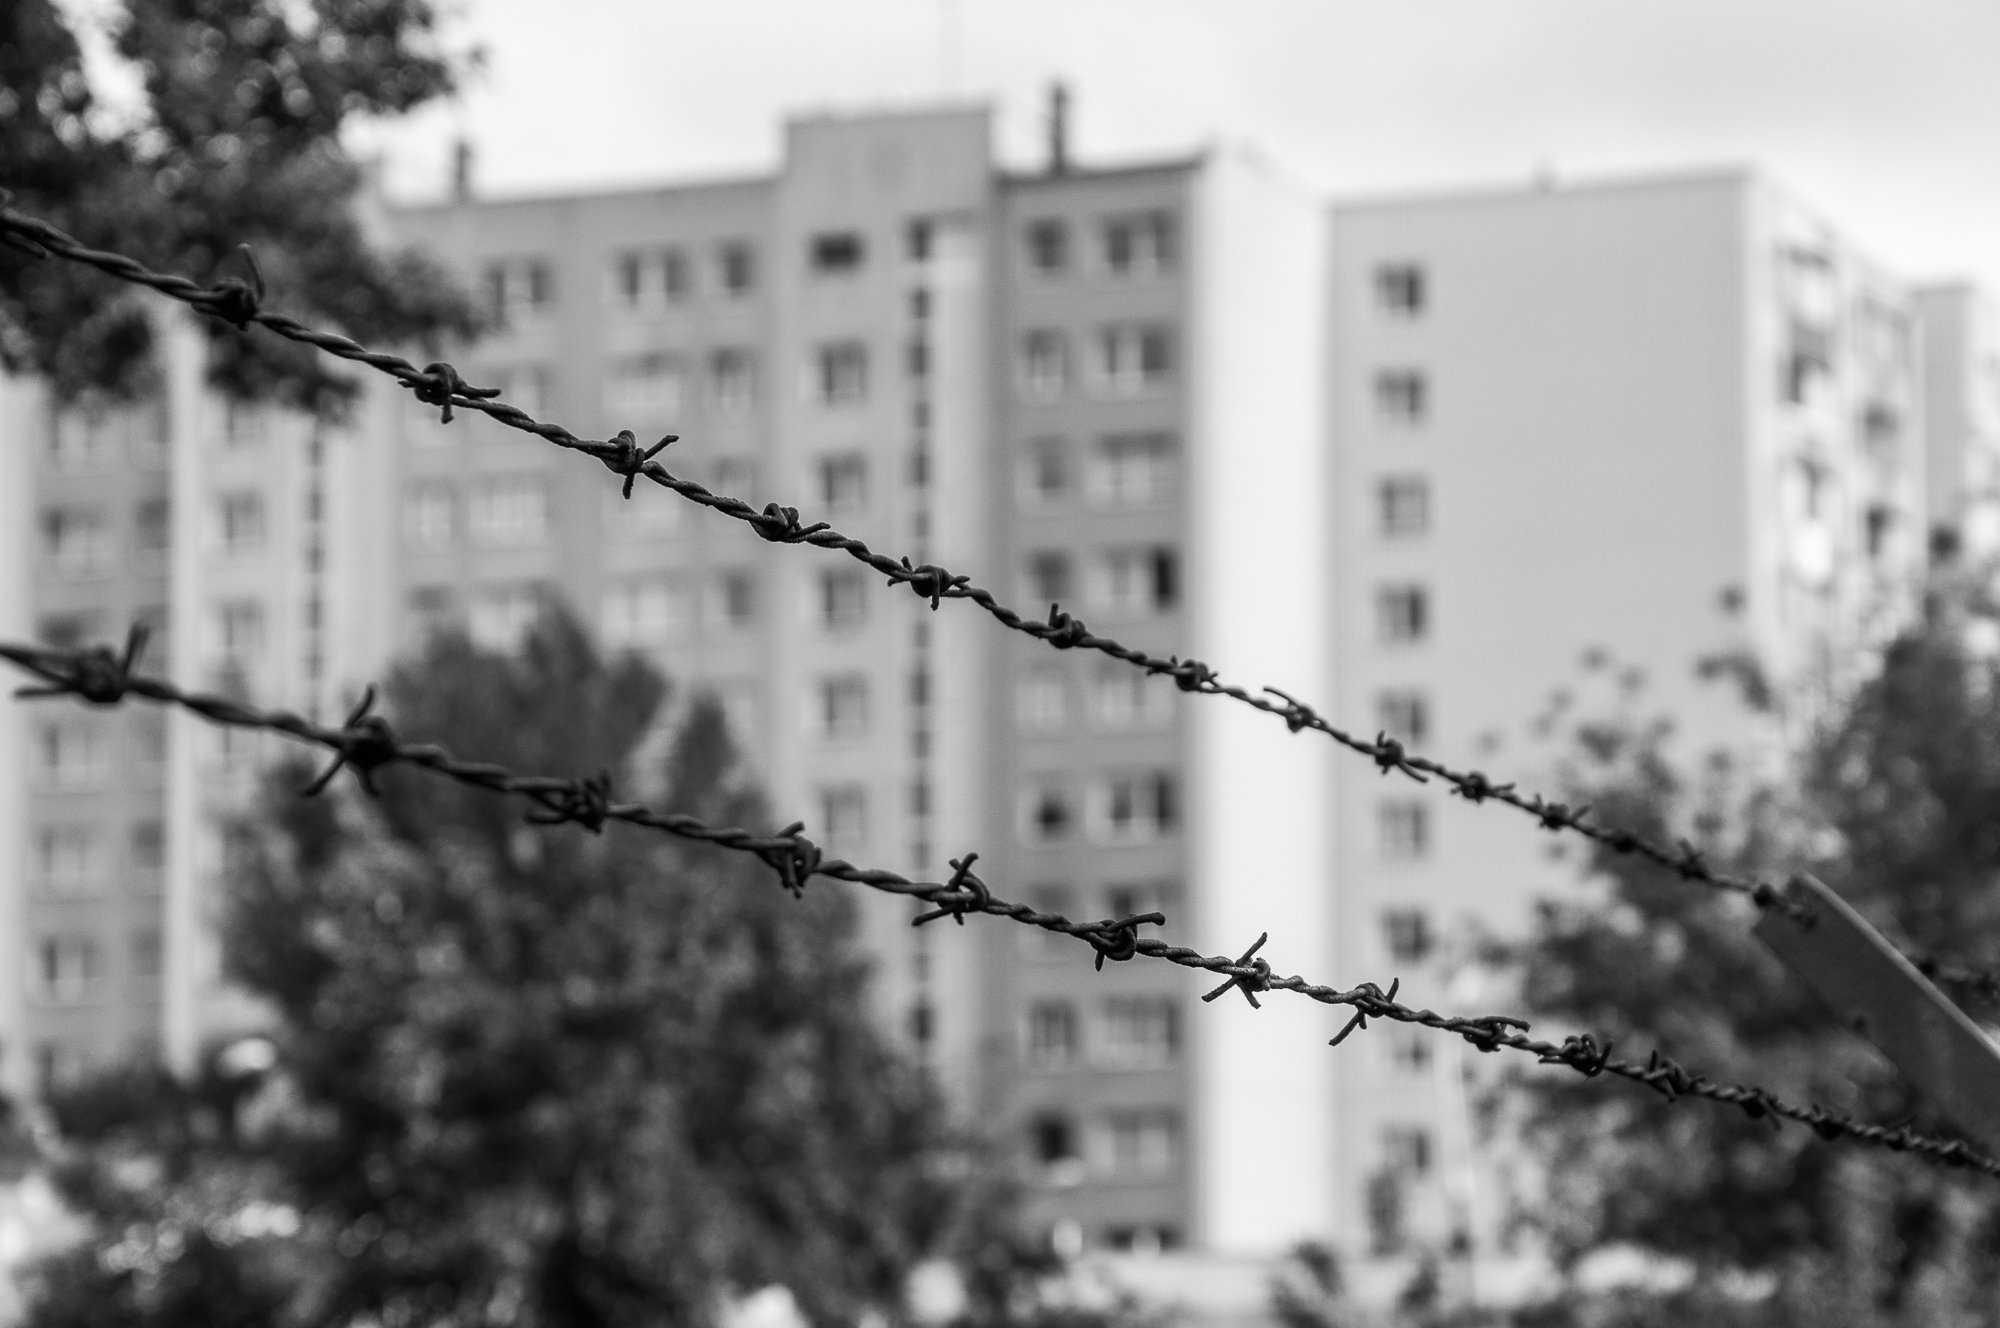 Adam Mazek Photography 2021. Warsaw Street Photography. Post: "I believe in the possibility of changing the world through my art." Minimalism. Barbed wire. Living in Poland.